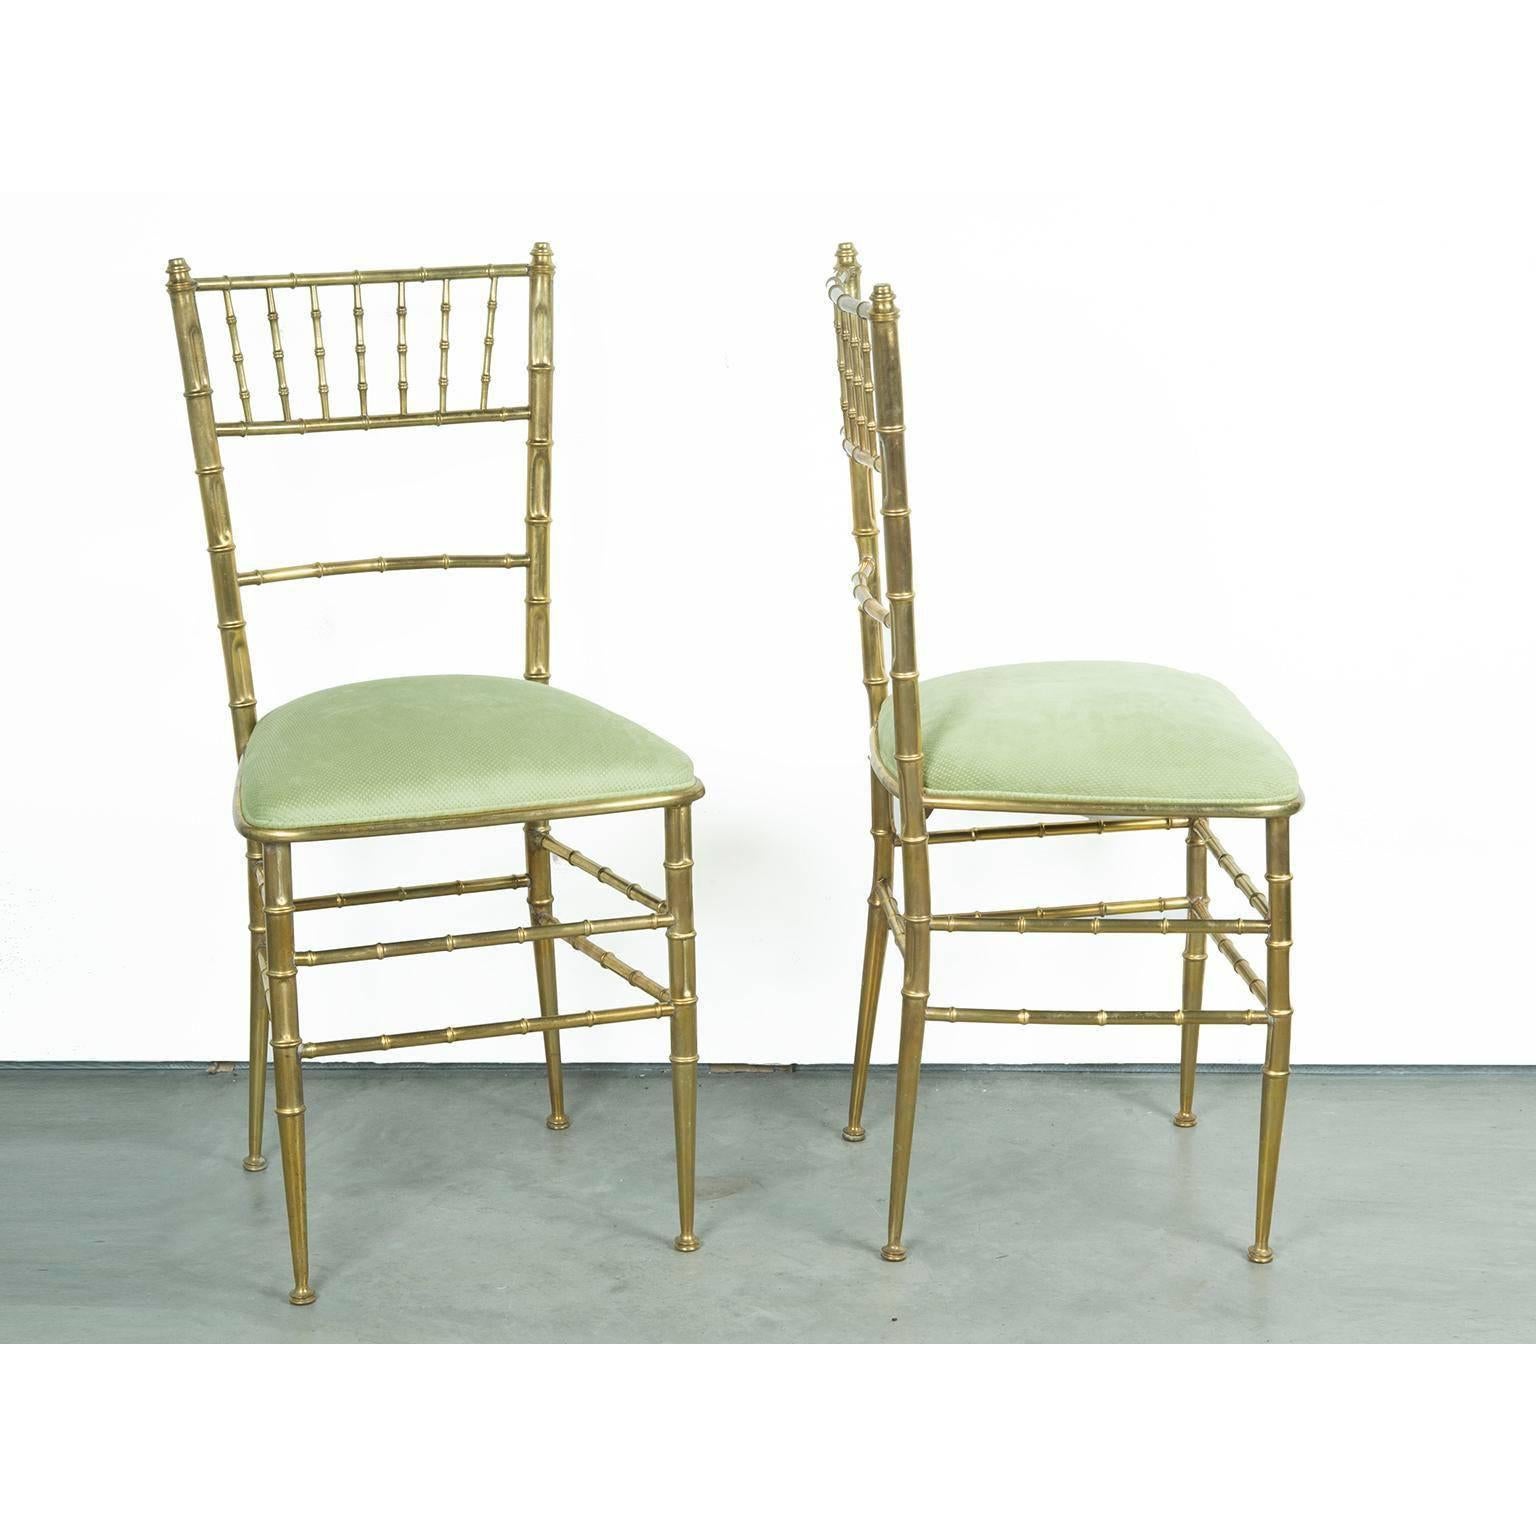 Offered is a pair of Mid-Century Modern Italian brass Chiavari faux bamboo style armless chairs that have been updated with a warm tone moss green velvet / velour fabric that glamorously compliments the brass chair. This petite pair would look